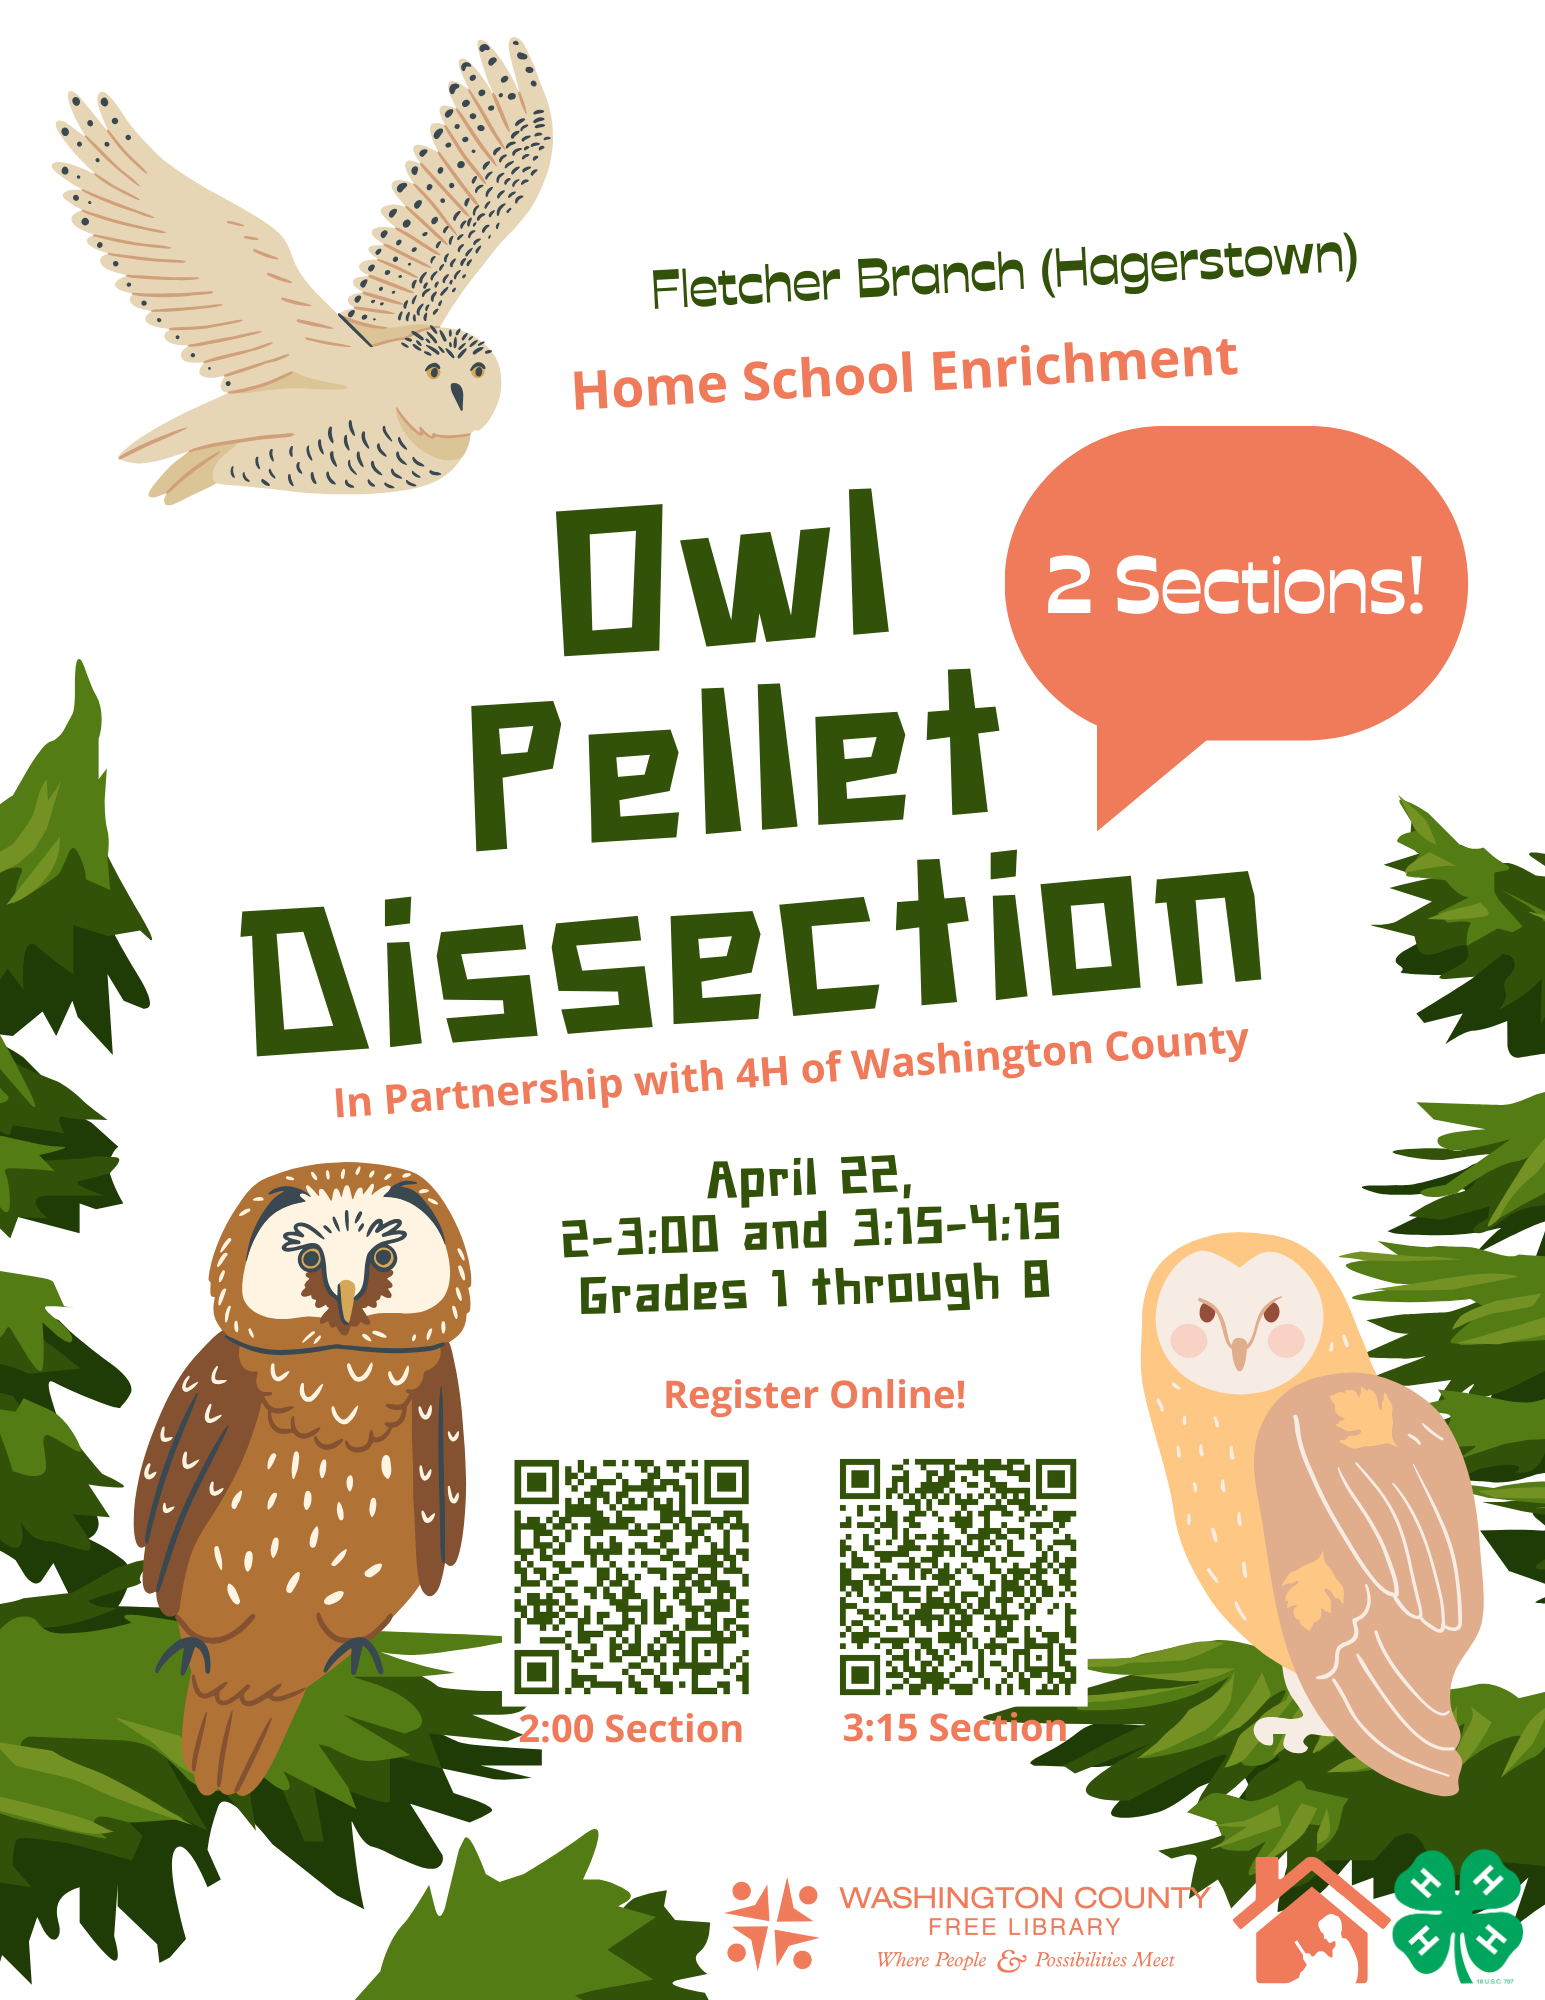 Owls swoop in from the corners of the page and settle among evergreen branches in the lower left and right corners, staring down the viewer. The flyer reads: "Fletcher Branch (Hagerstown) Home School Enrichment Class: Owl Pellet Dissection, in Partnership with 4H of Washington County. April 22nd, 3:15 to 4:15, Grades 1 through 8. Register online!" There is a QR code to scan and register for the class. 